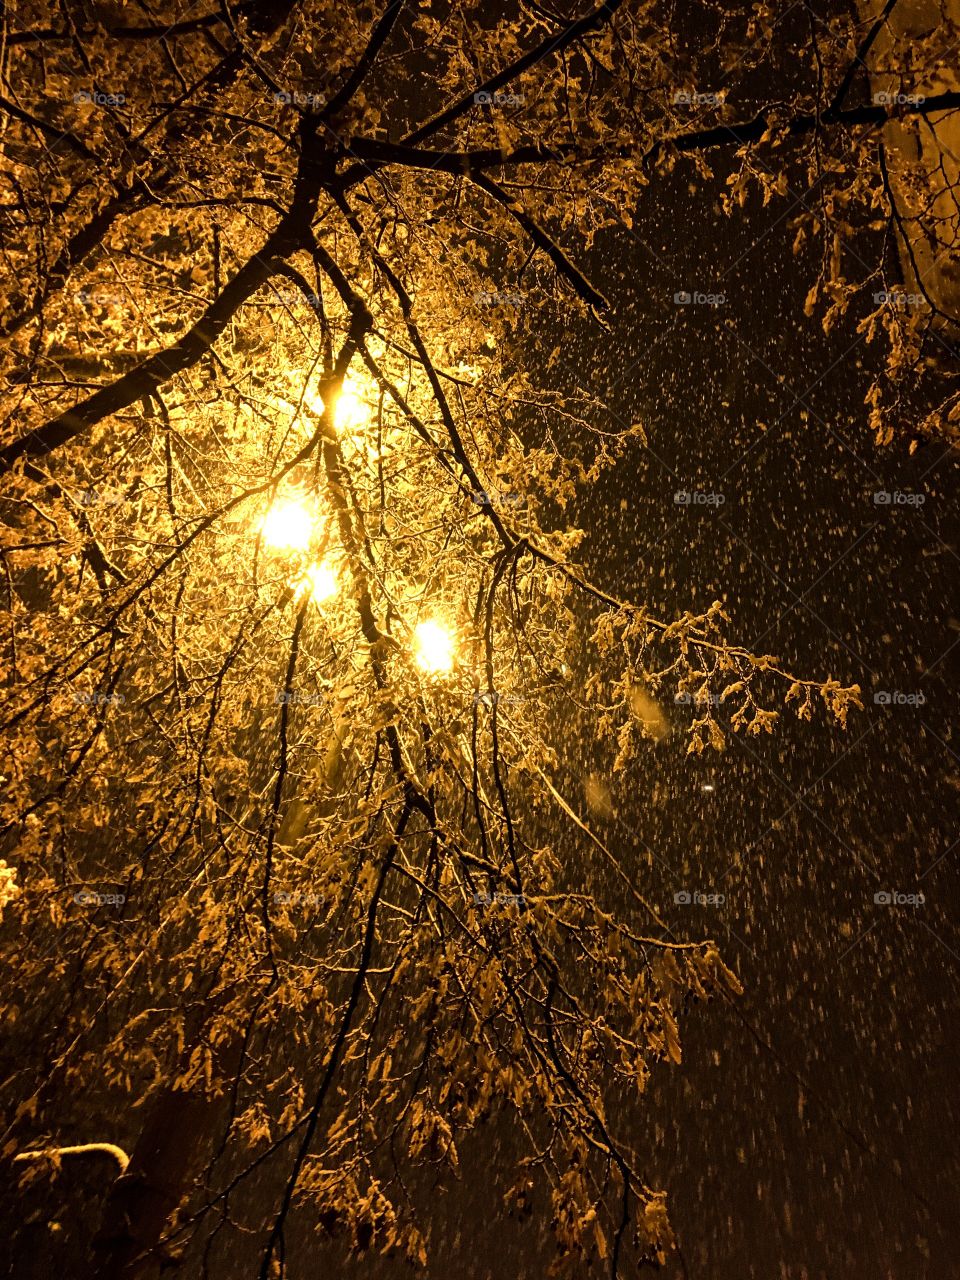 The snowy night. It’s snow and street lights. Night background. The night sky and tree branches in light. 